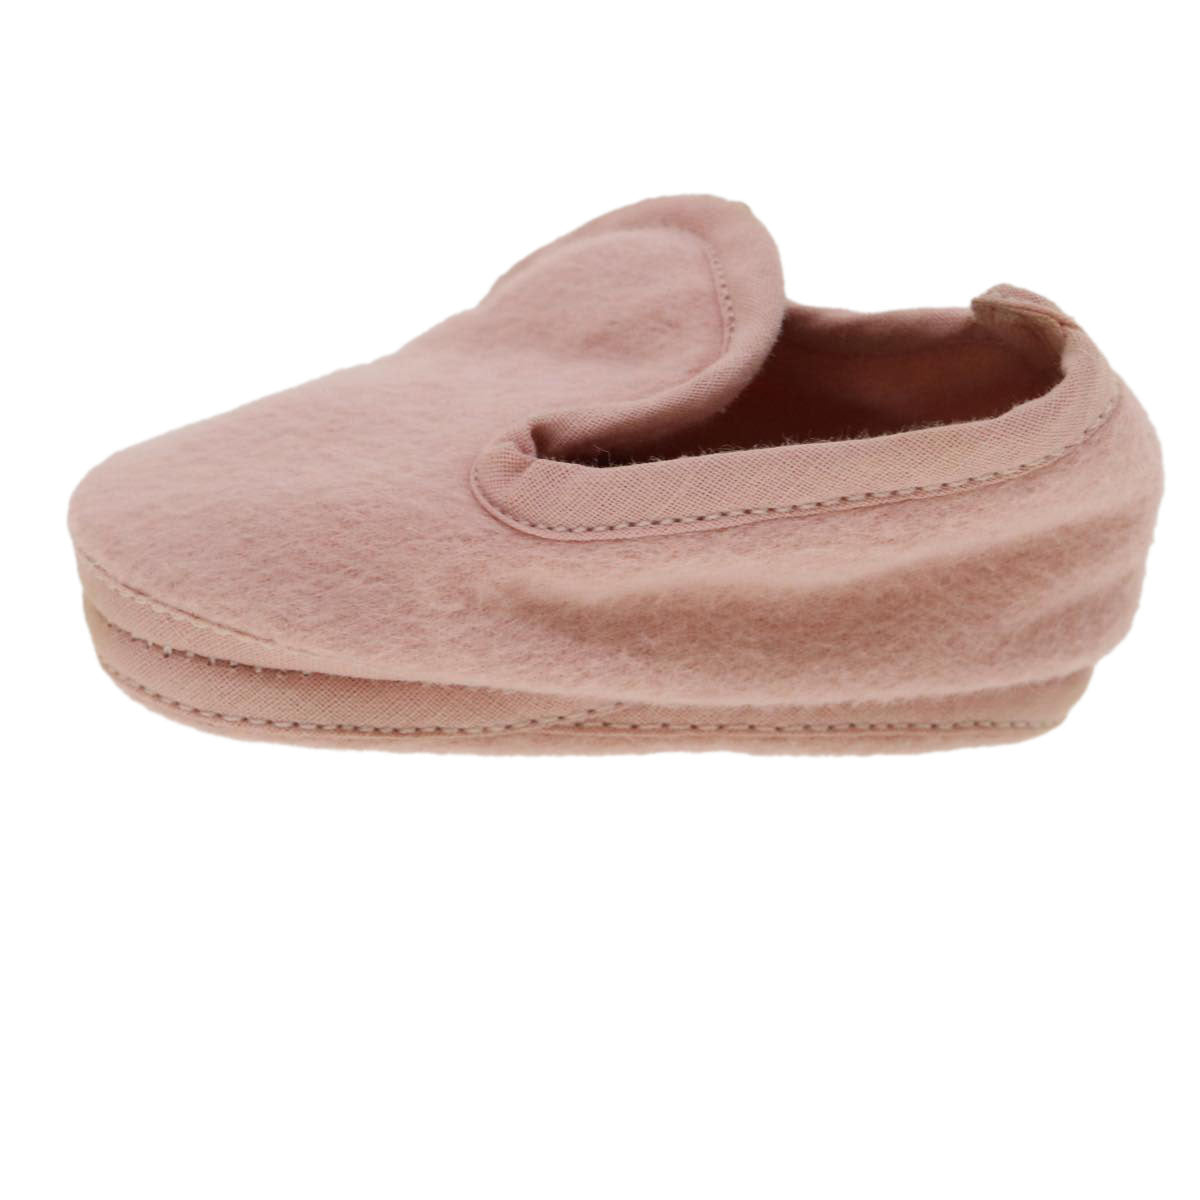 HERMES Baby Shoes Wool Pink Auth ar8794